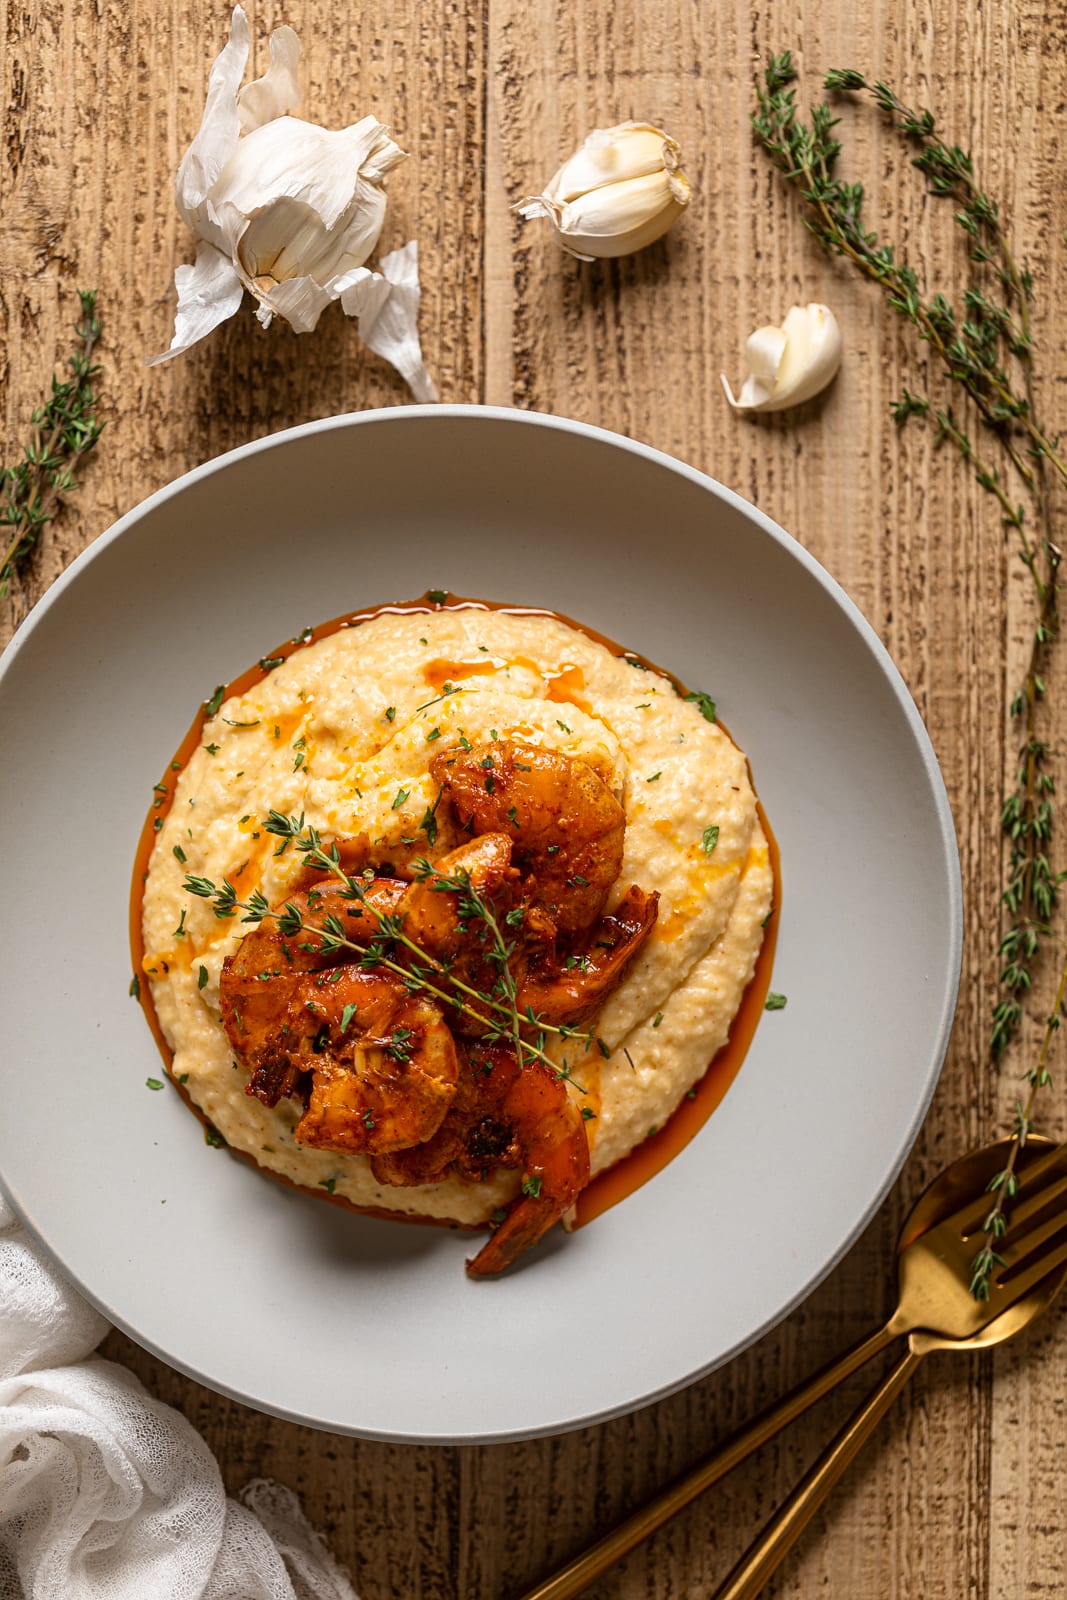 Overhead shot of a plate of Spicy Southern Shrimp and Grits on a wooden surface